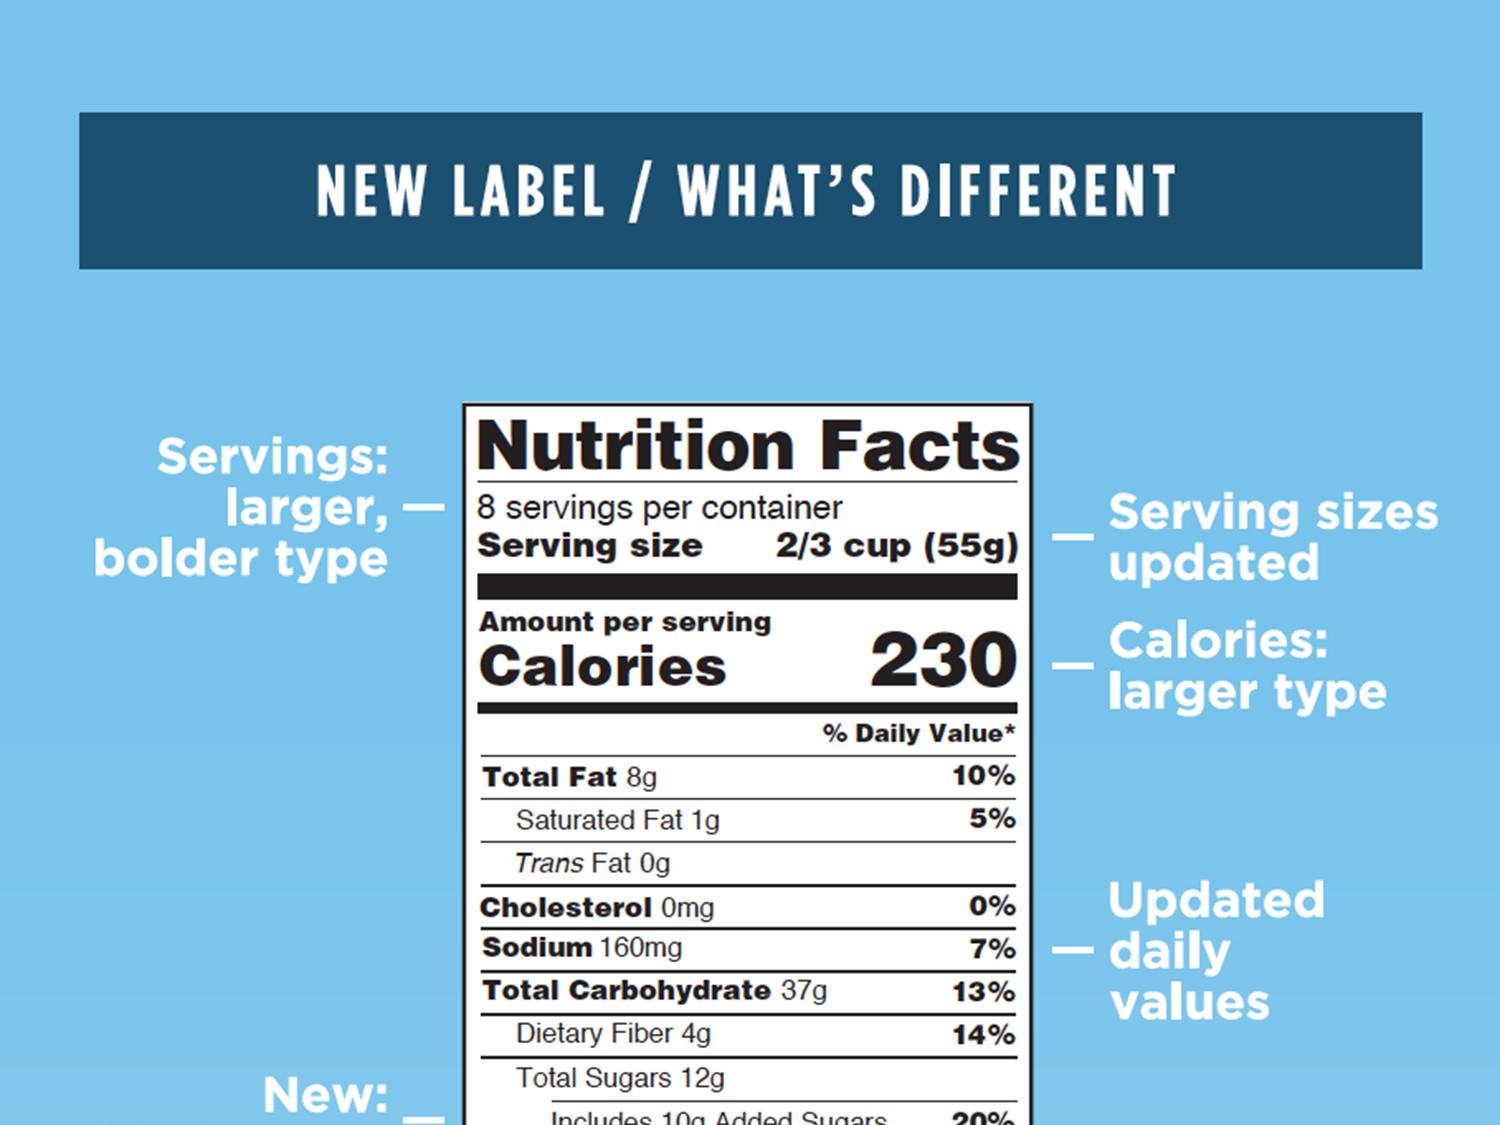 The updated U.S. Food and Drug Administration’s Nutrition Facts label highlights added sugars, as well as serving sizes and calories. The new label will be seen on packaged foods starting in 2018. (Illustration courtesy of the U.S. Food and Drug Administration)